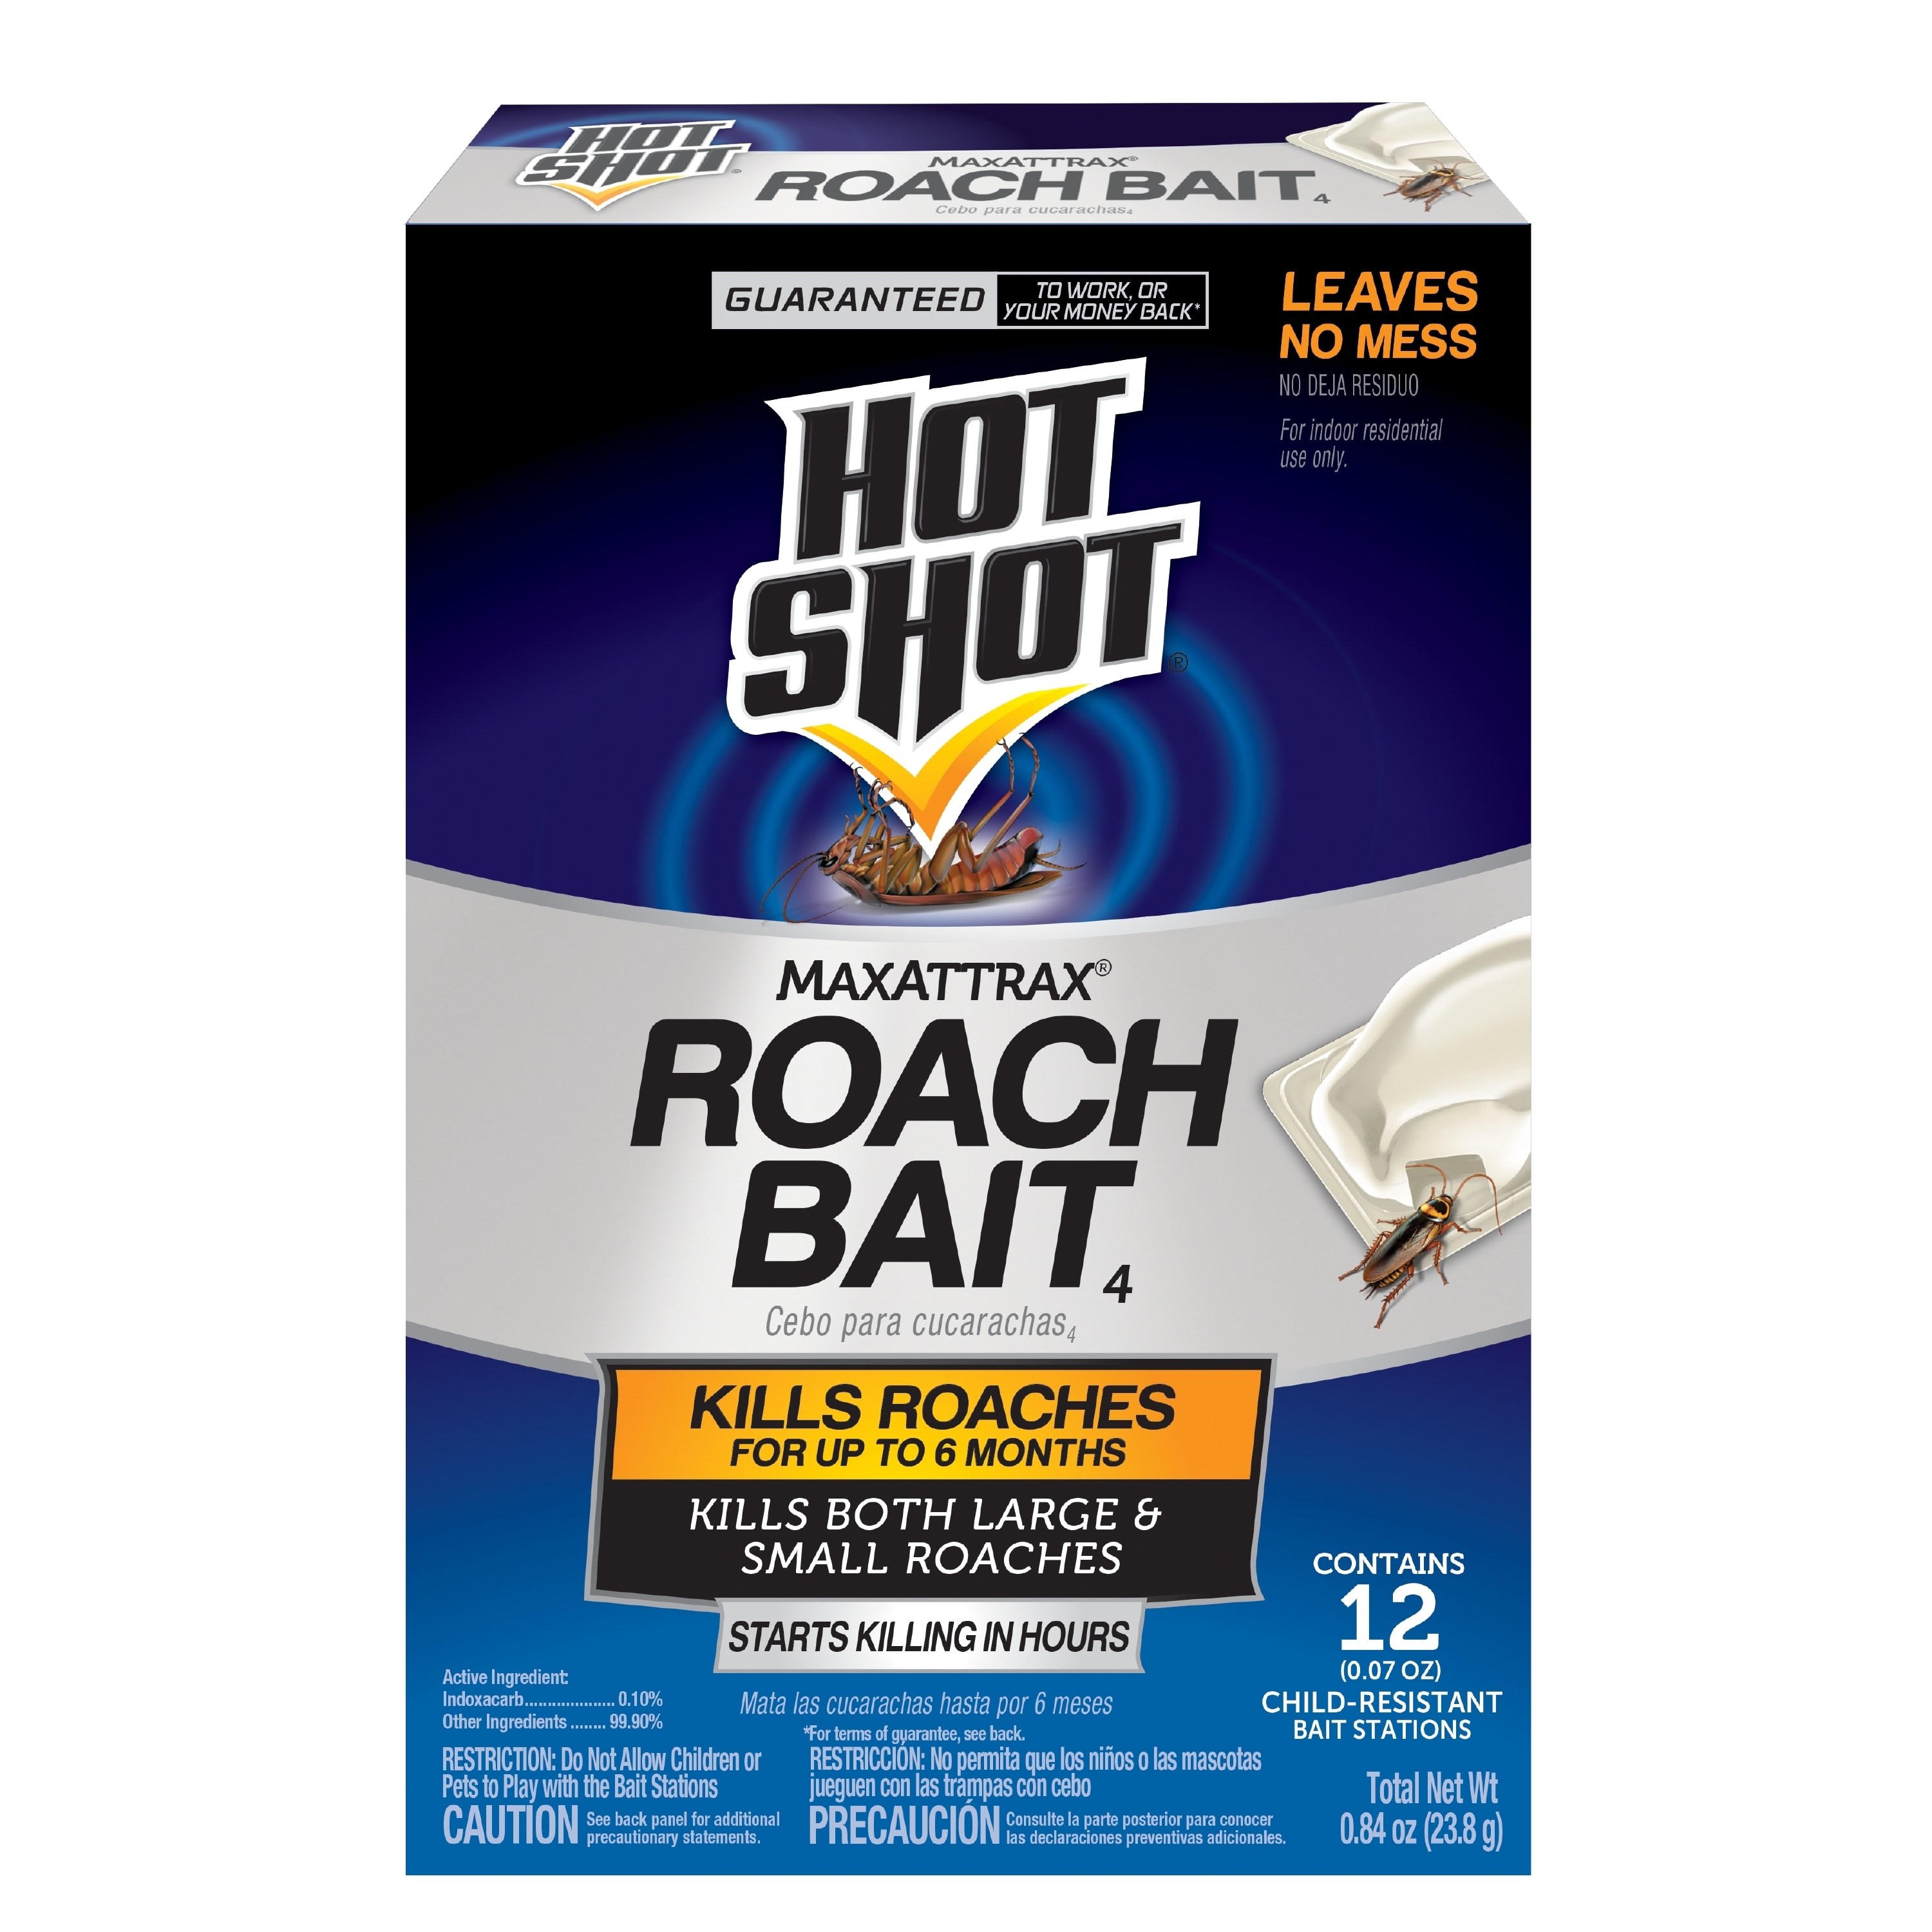 Raid Double Control Small Roach Baits Plus Egg Stoppers 12+3 ct